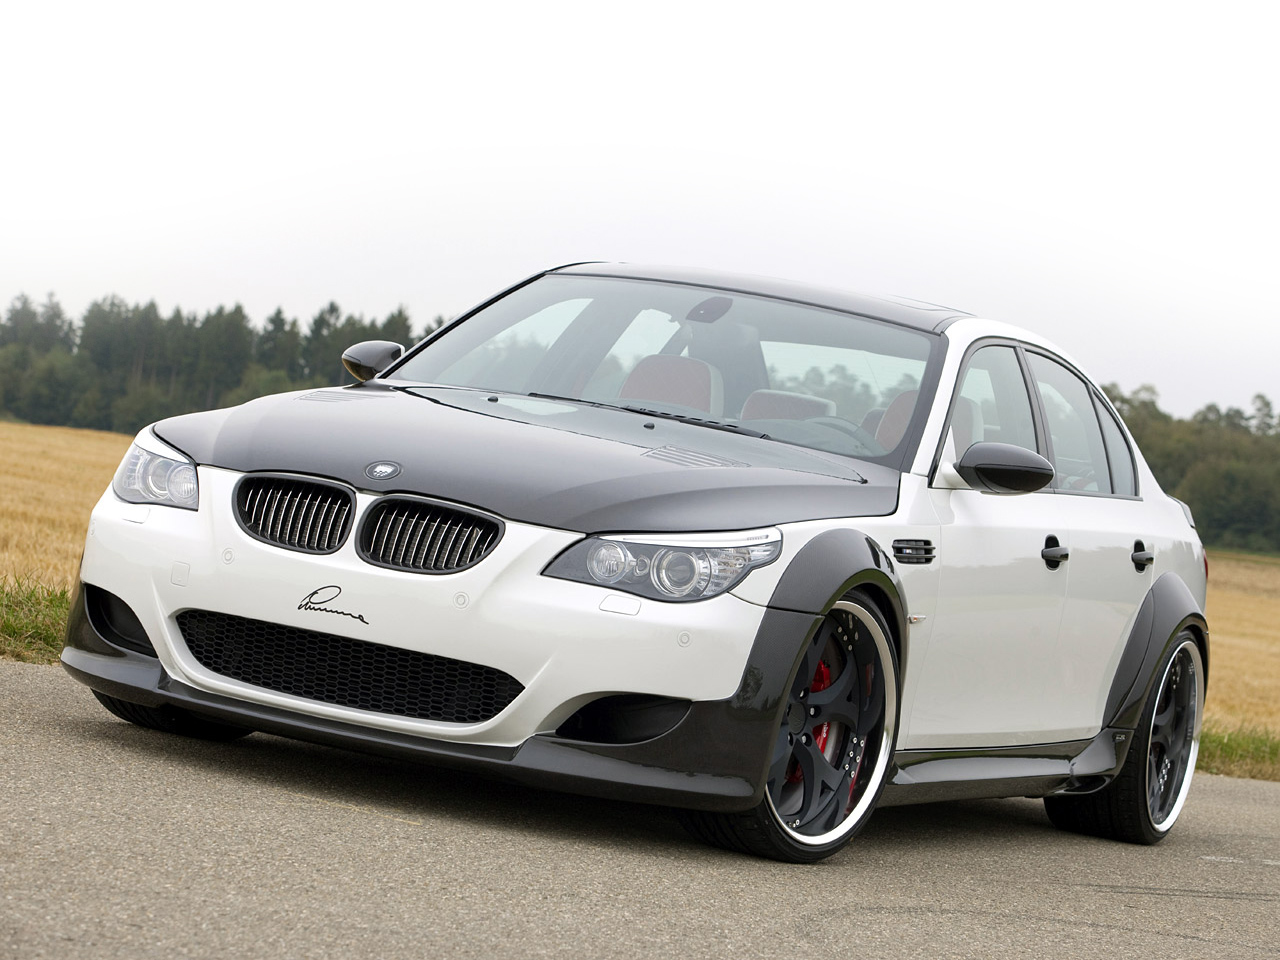 Download full size White tuning Bmw wallpaper / 1280x960